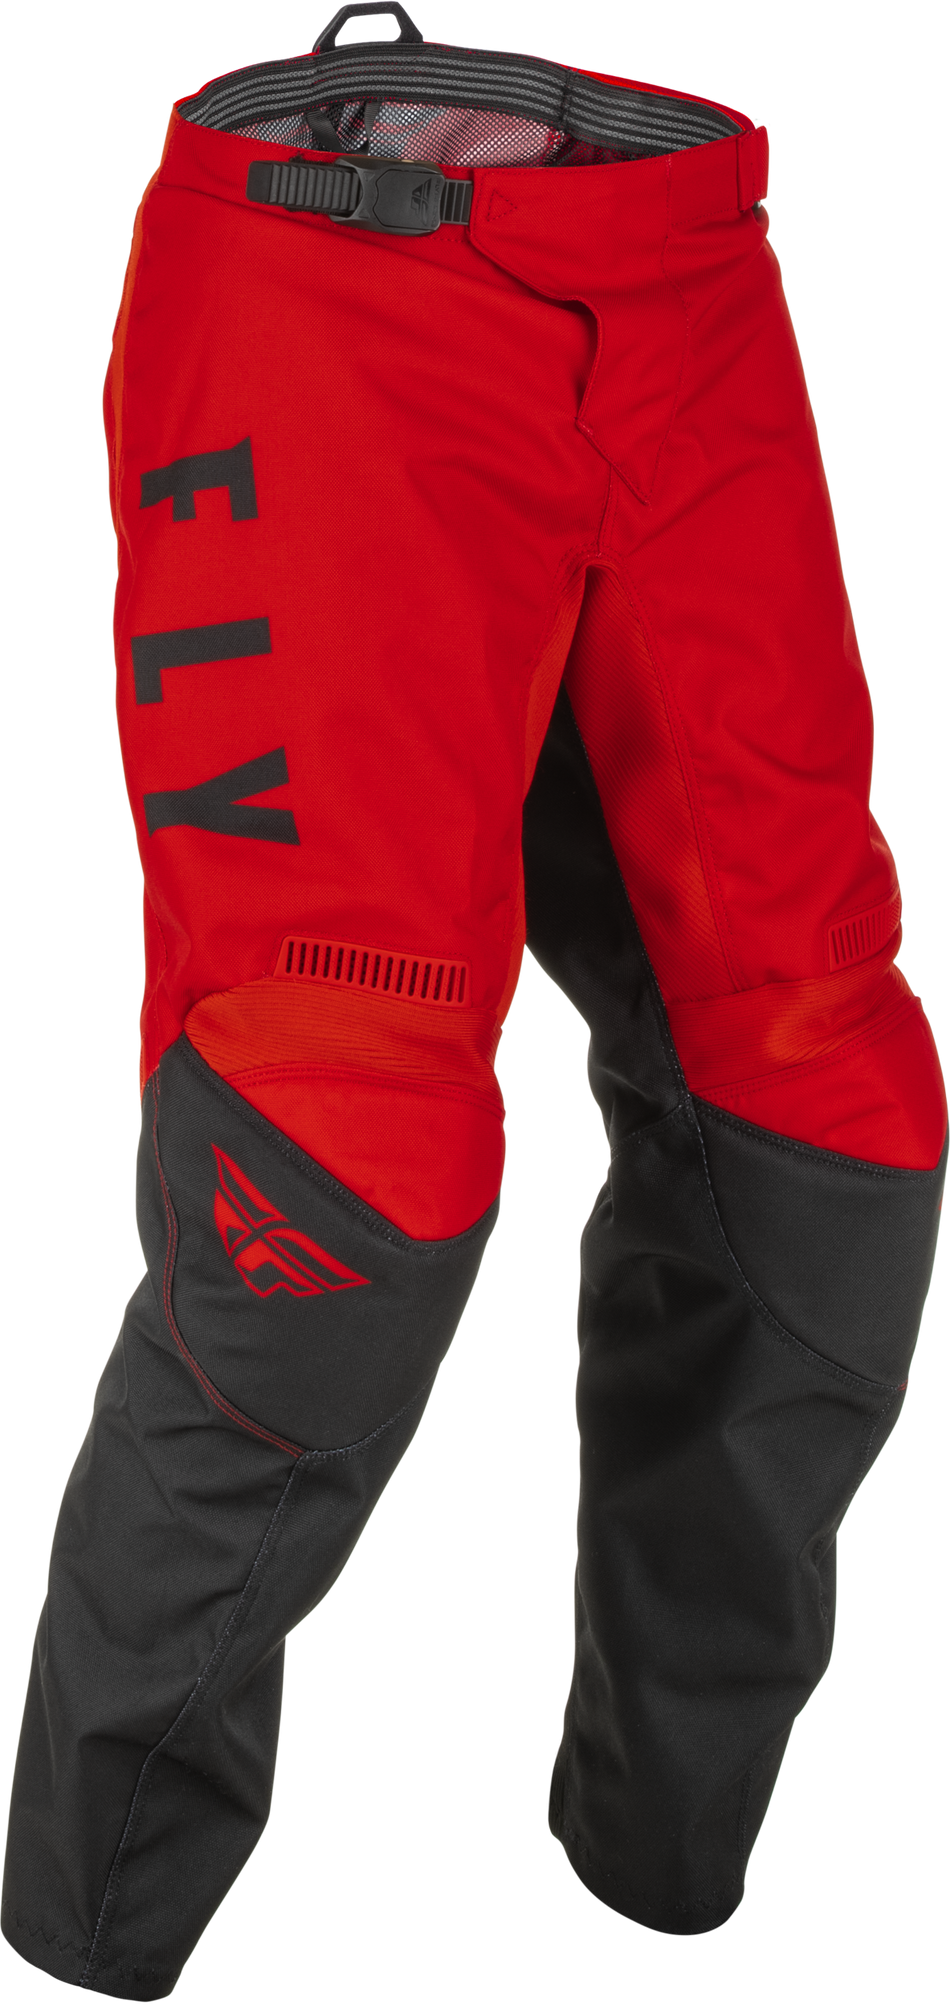 FLY RACING Youth F-16 Pants Red/Black Sz 26 375-93326